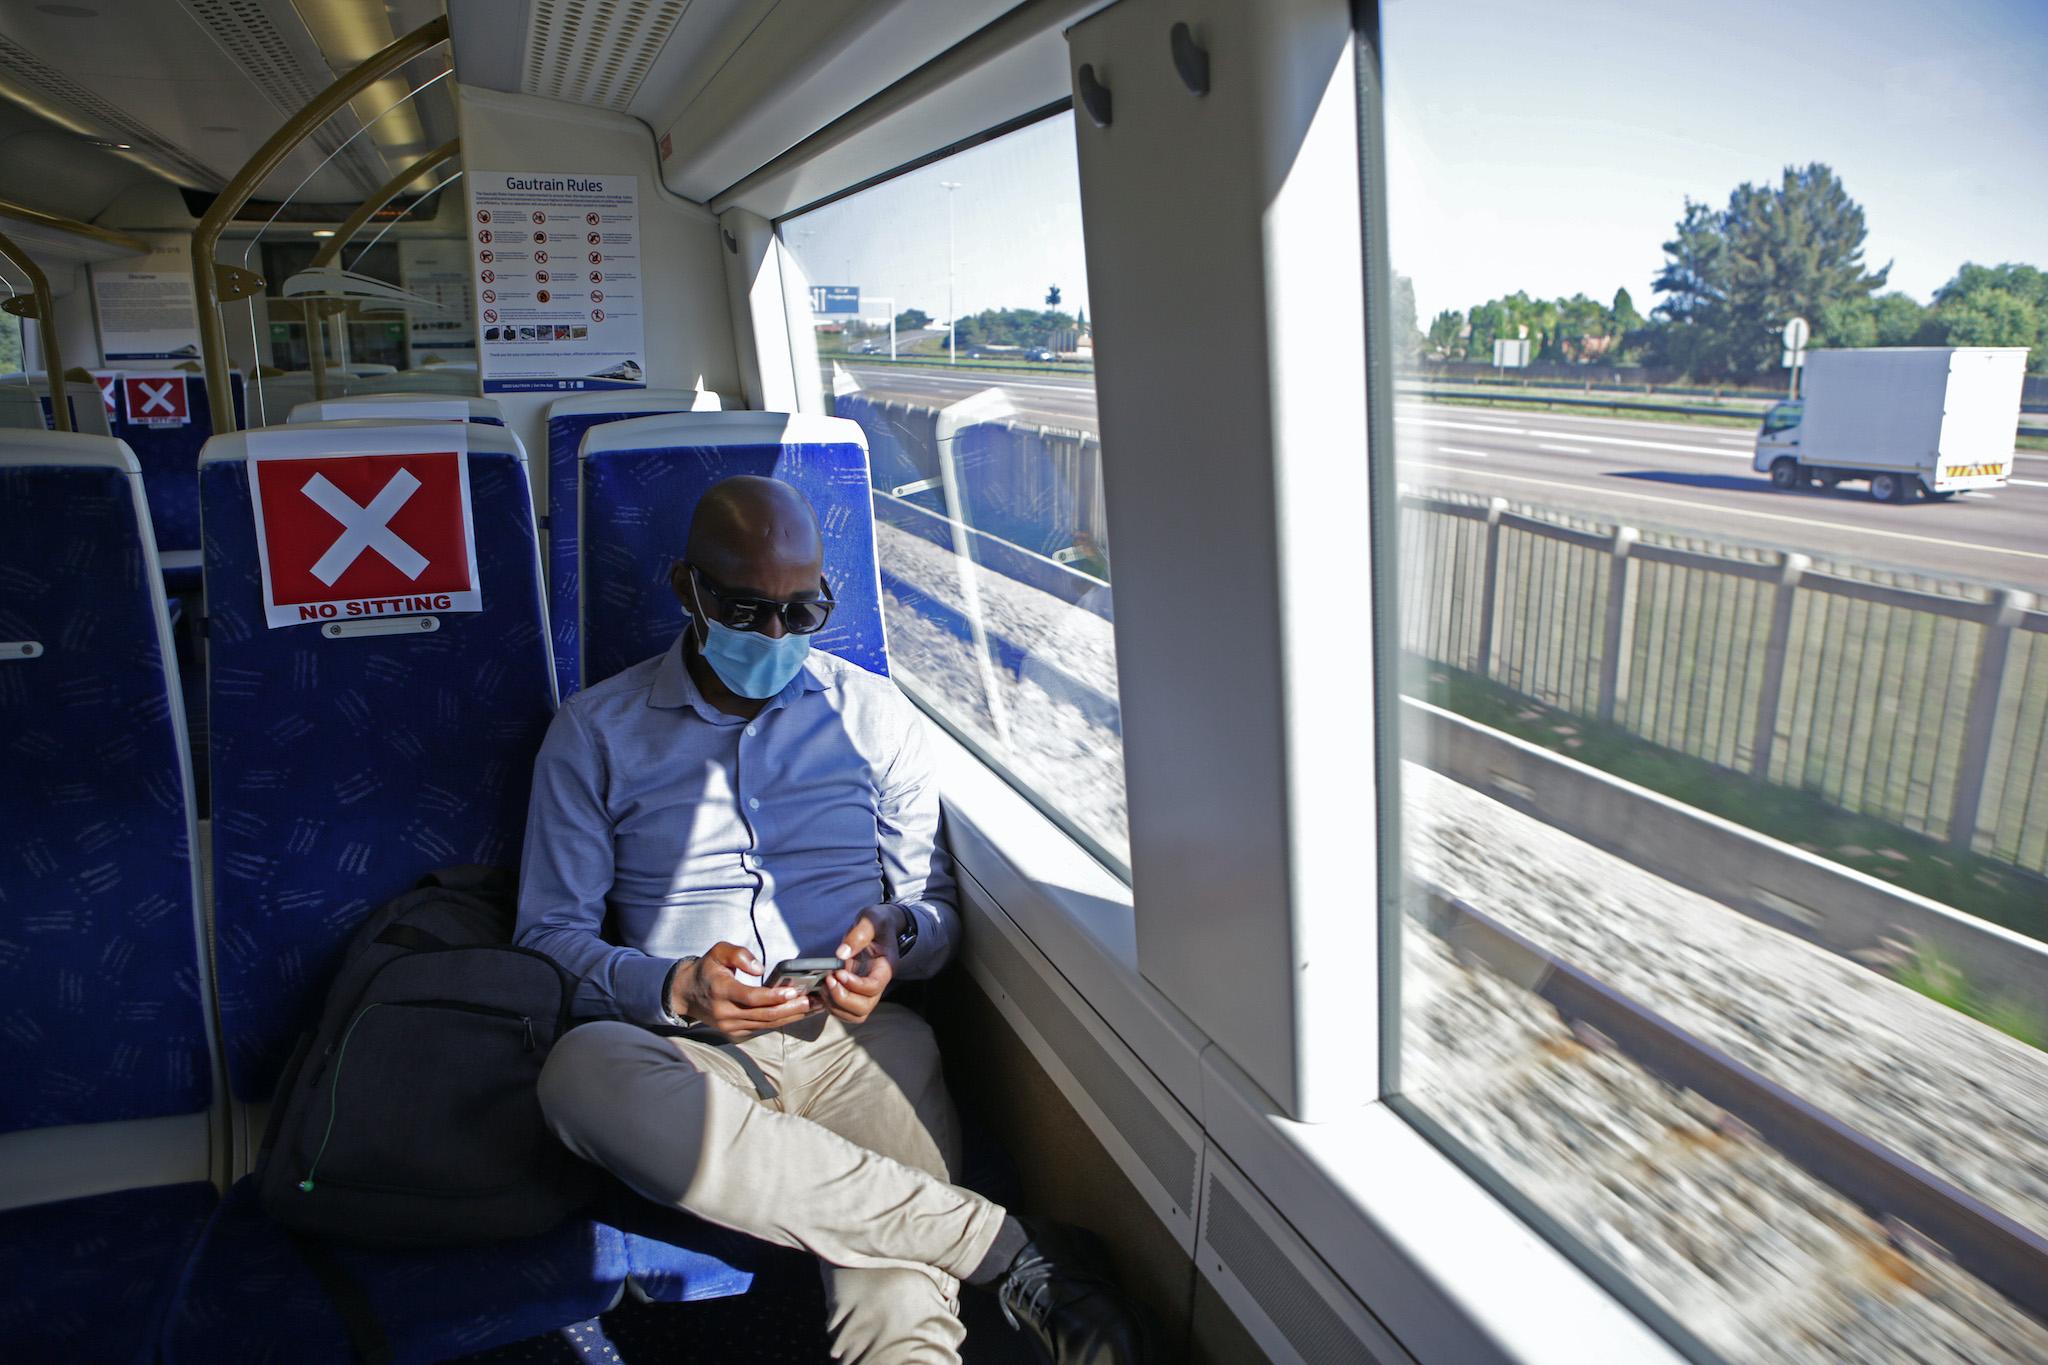 A commuter uses his mobile phone inside the Gautrain after boarding at the Centurion Station in Centurion on May 4, 2020